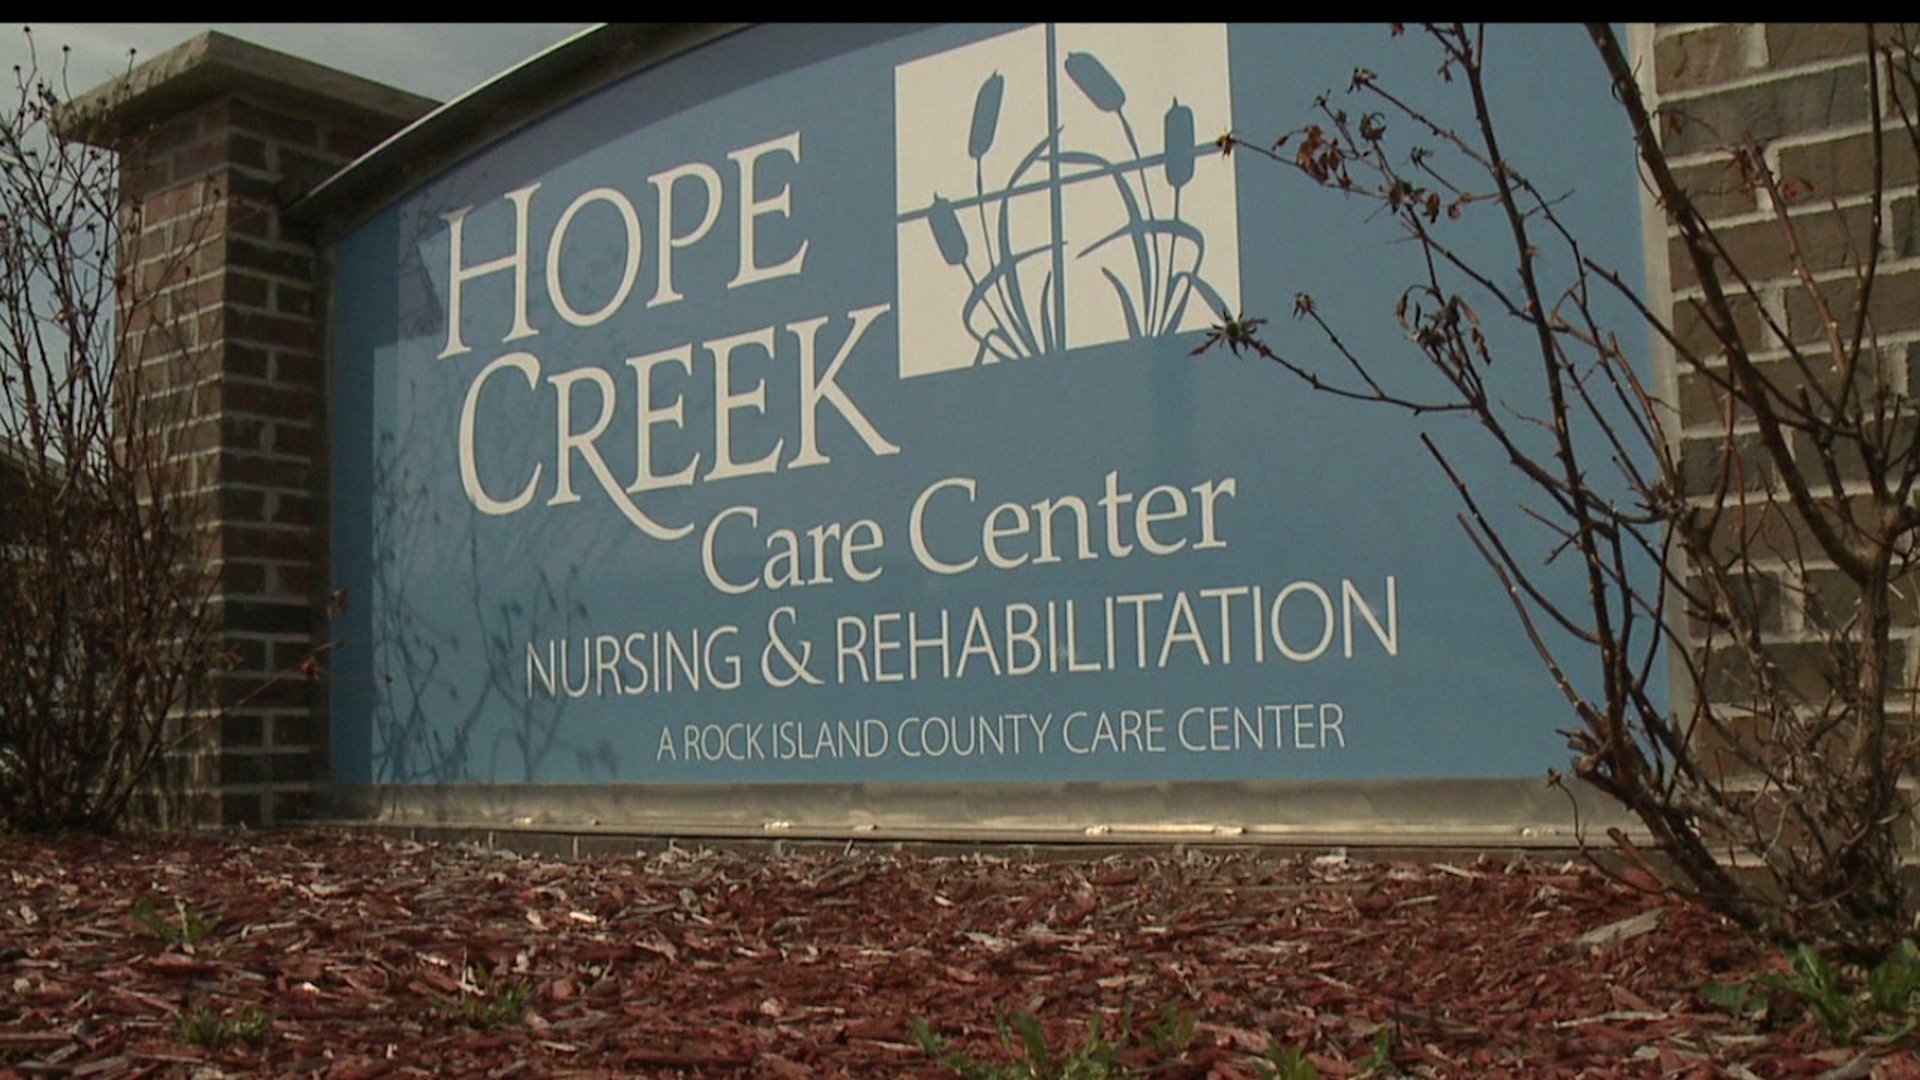 A vote on the sale of the Hope Creek Care Center is expected on February 26th by the Rock Island County board. That vote could be impacting the current  election.